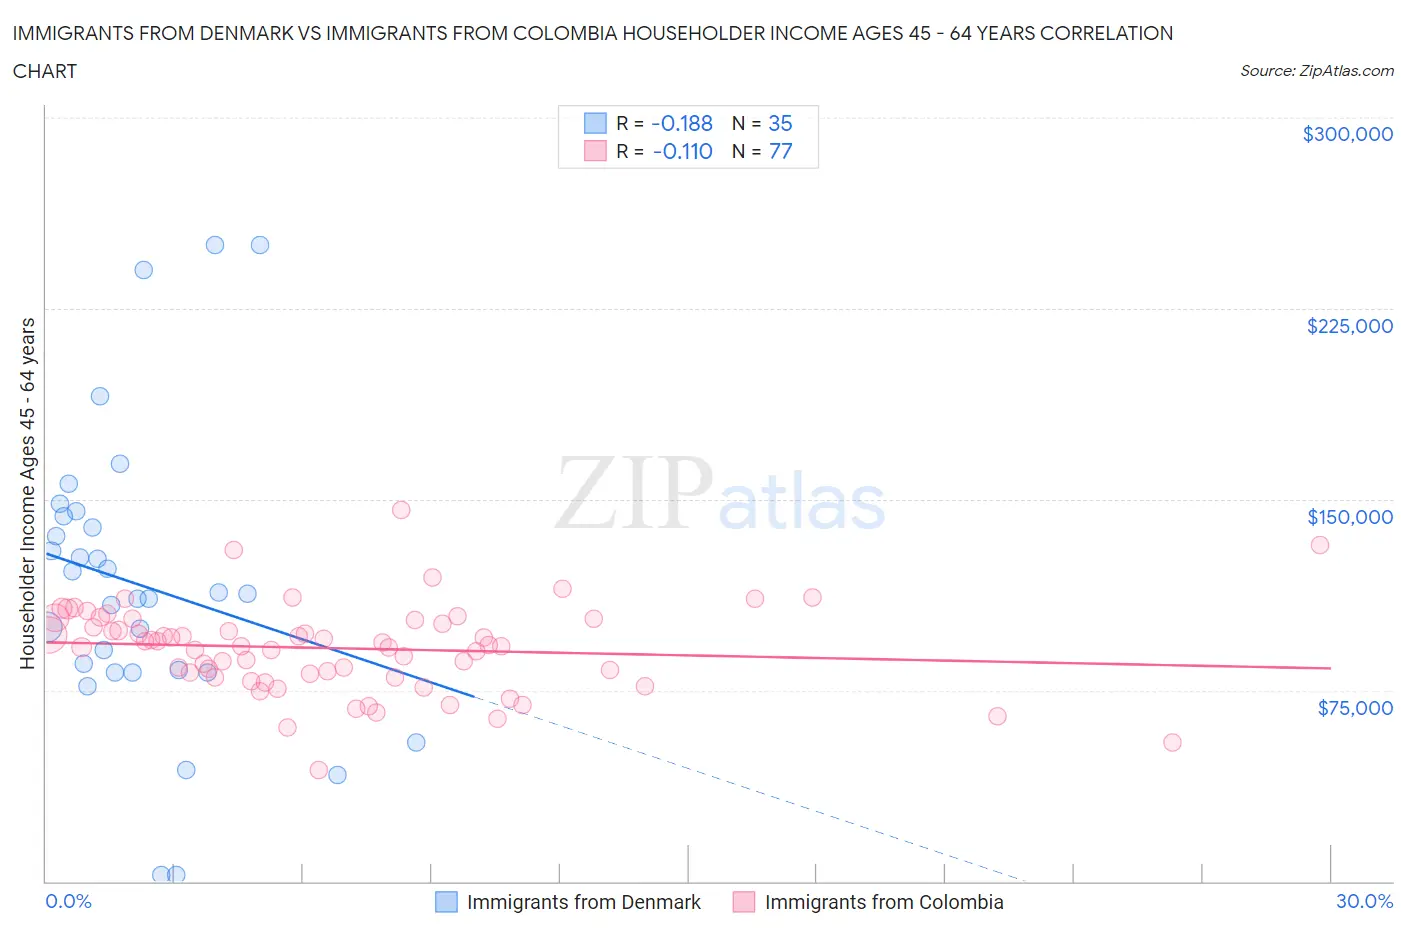 Immigrants from Denmark vs Immigrants from Colombia Householder Income Ages 45 - 64 years